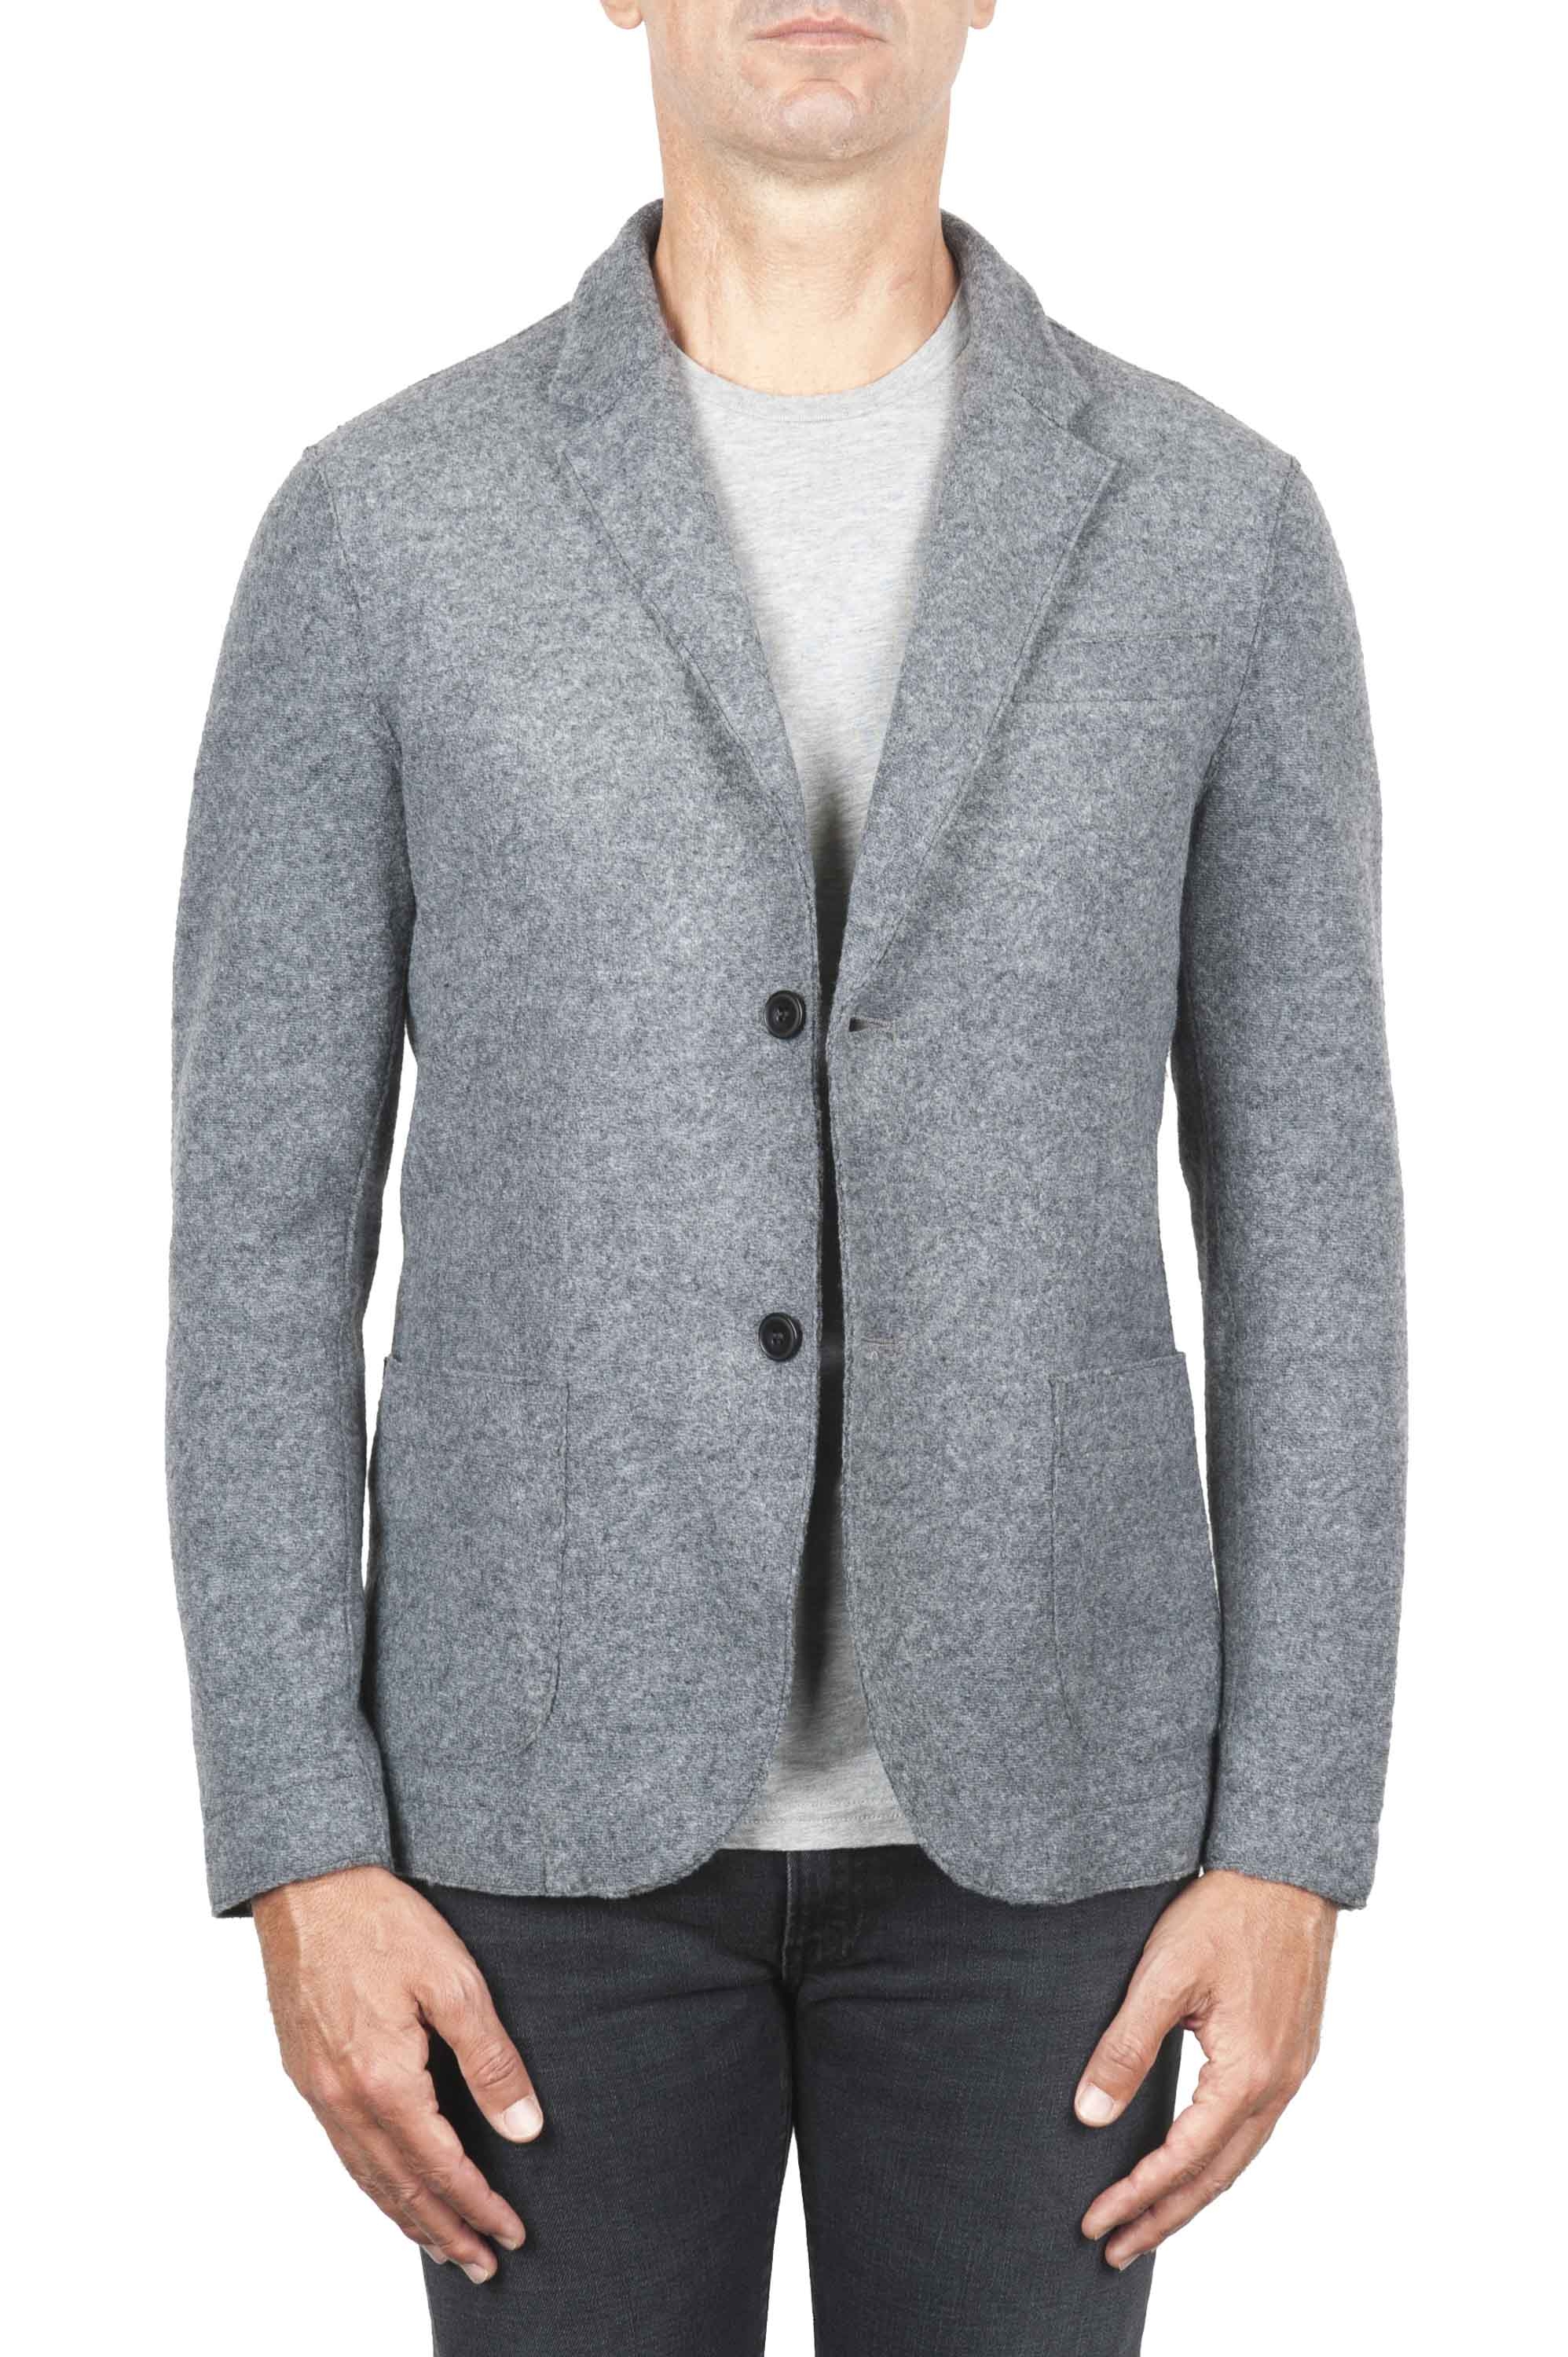 SBU 01336_19AW Grey wool blend sport jacket unconstructed and unlined 01